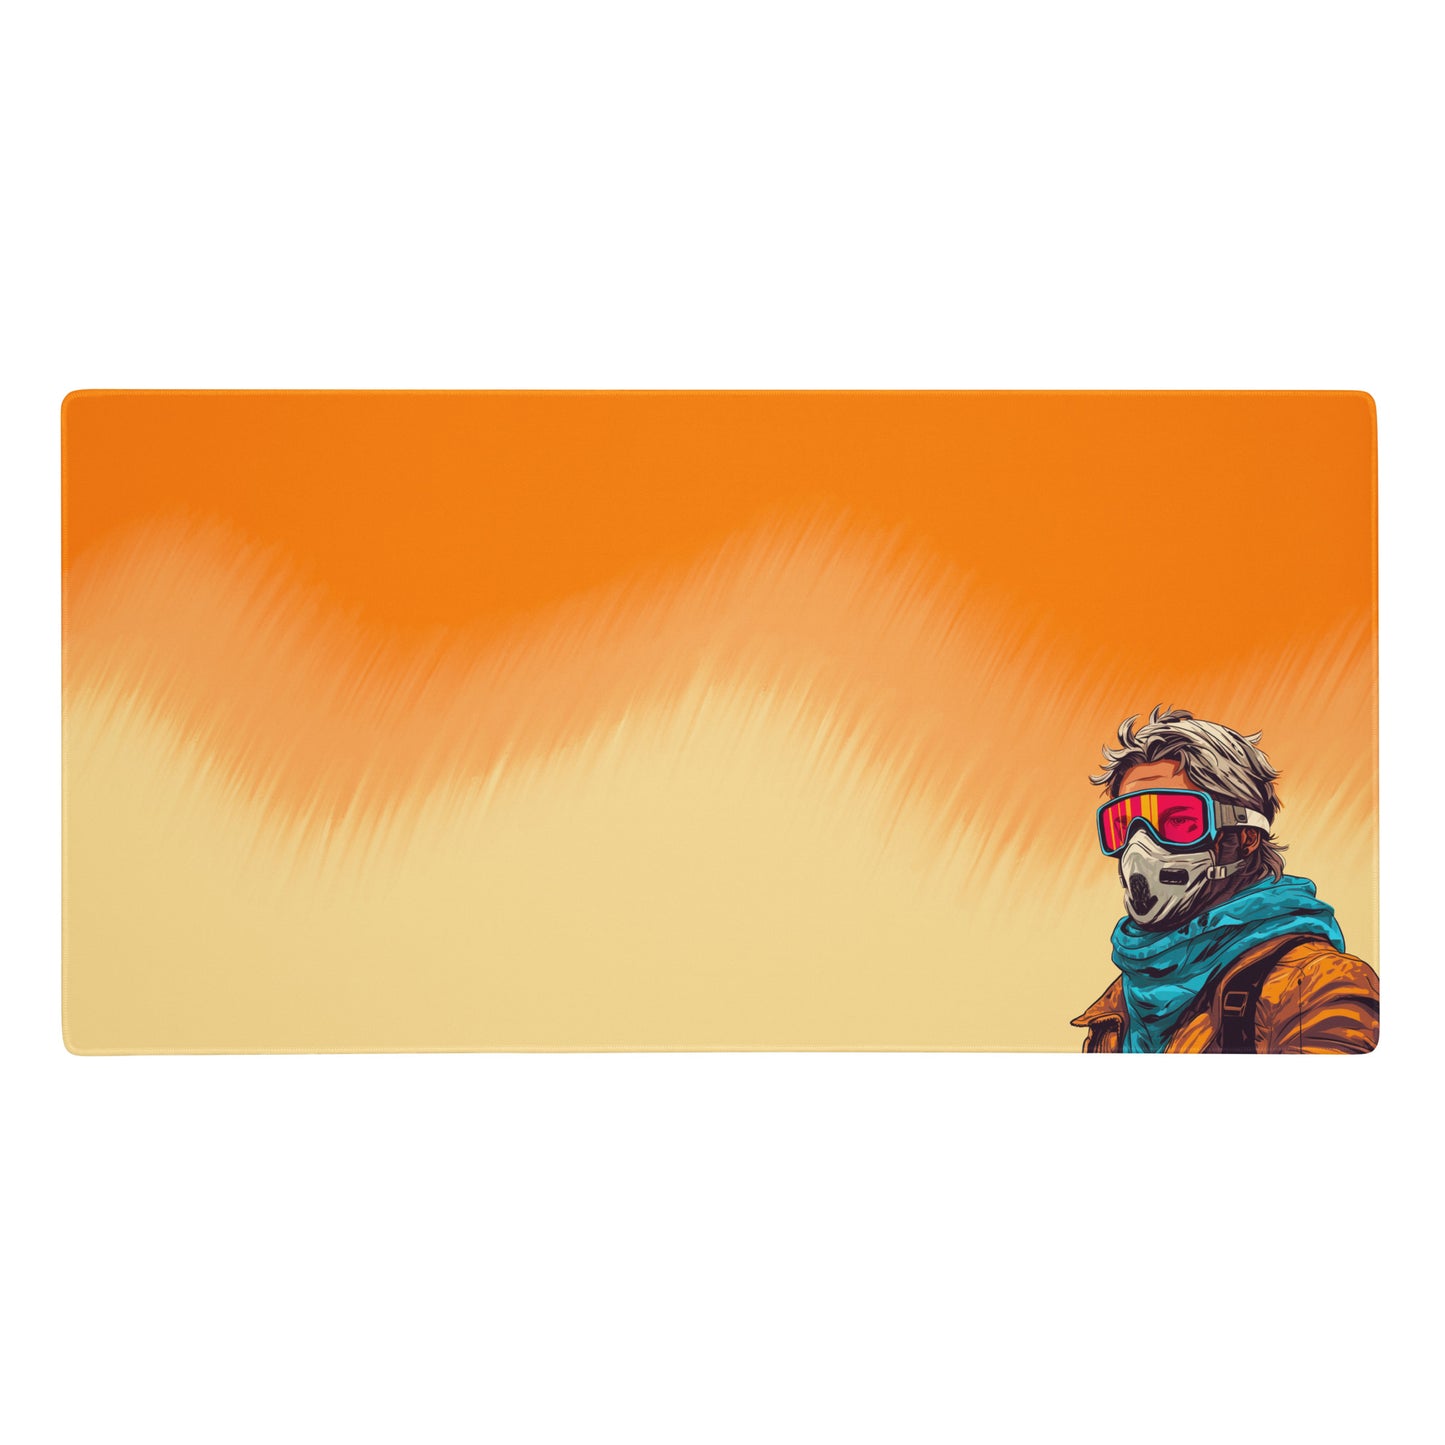 A 36" x 18" desk pad with a man standing in a sandstorm.